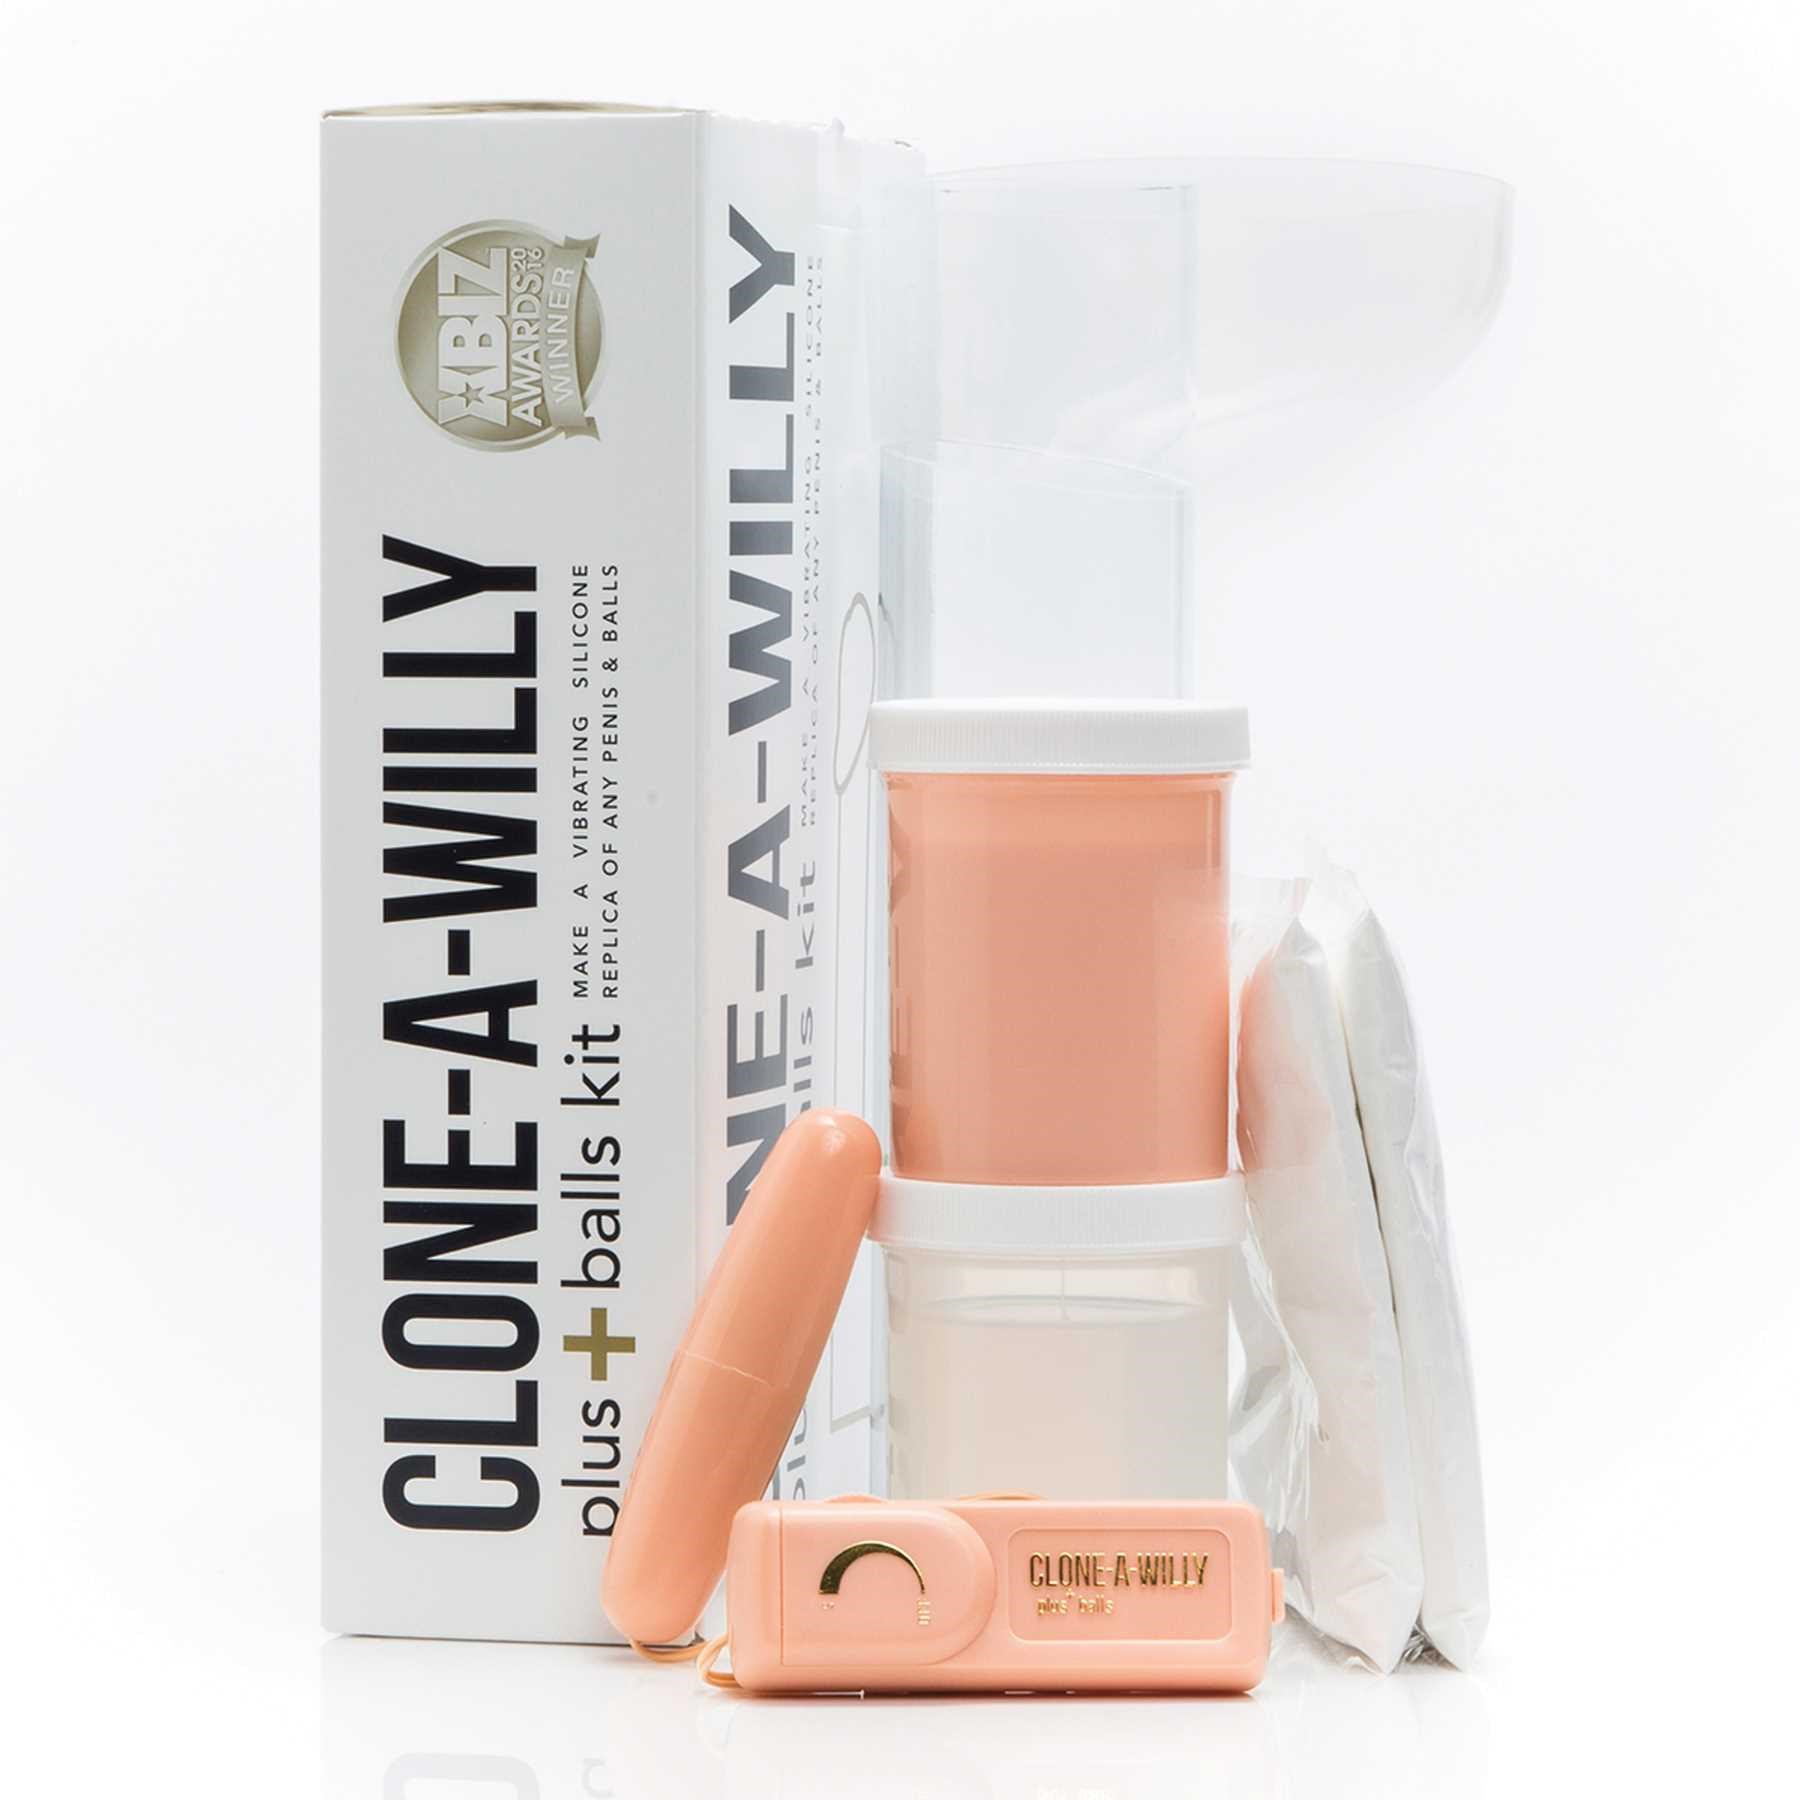 Clone-A-Willy Plus Balls Kit